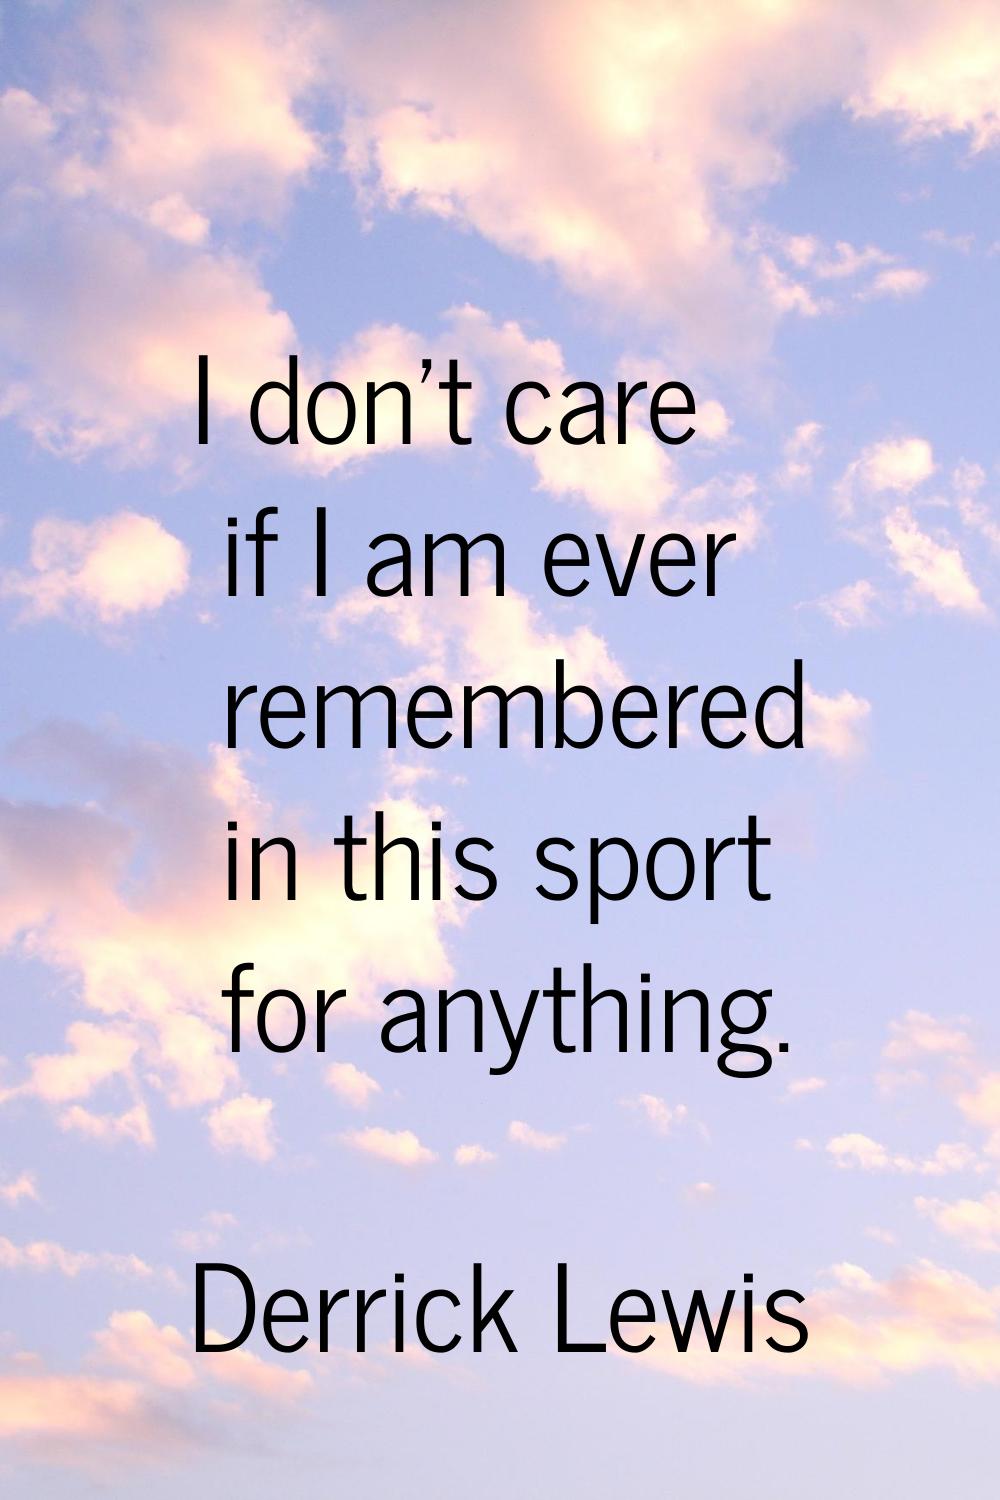 I don't care if I am ever remembered in this sport for anything.